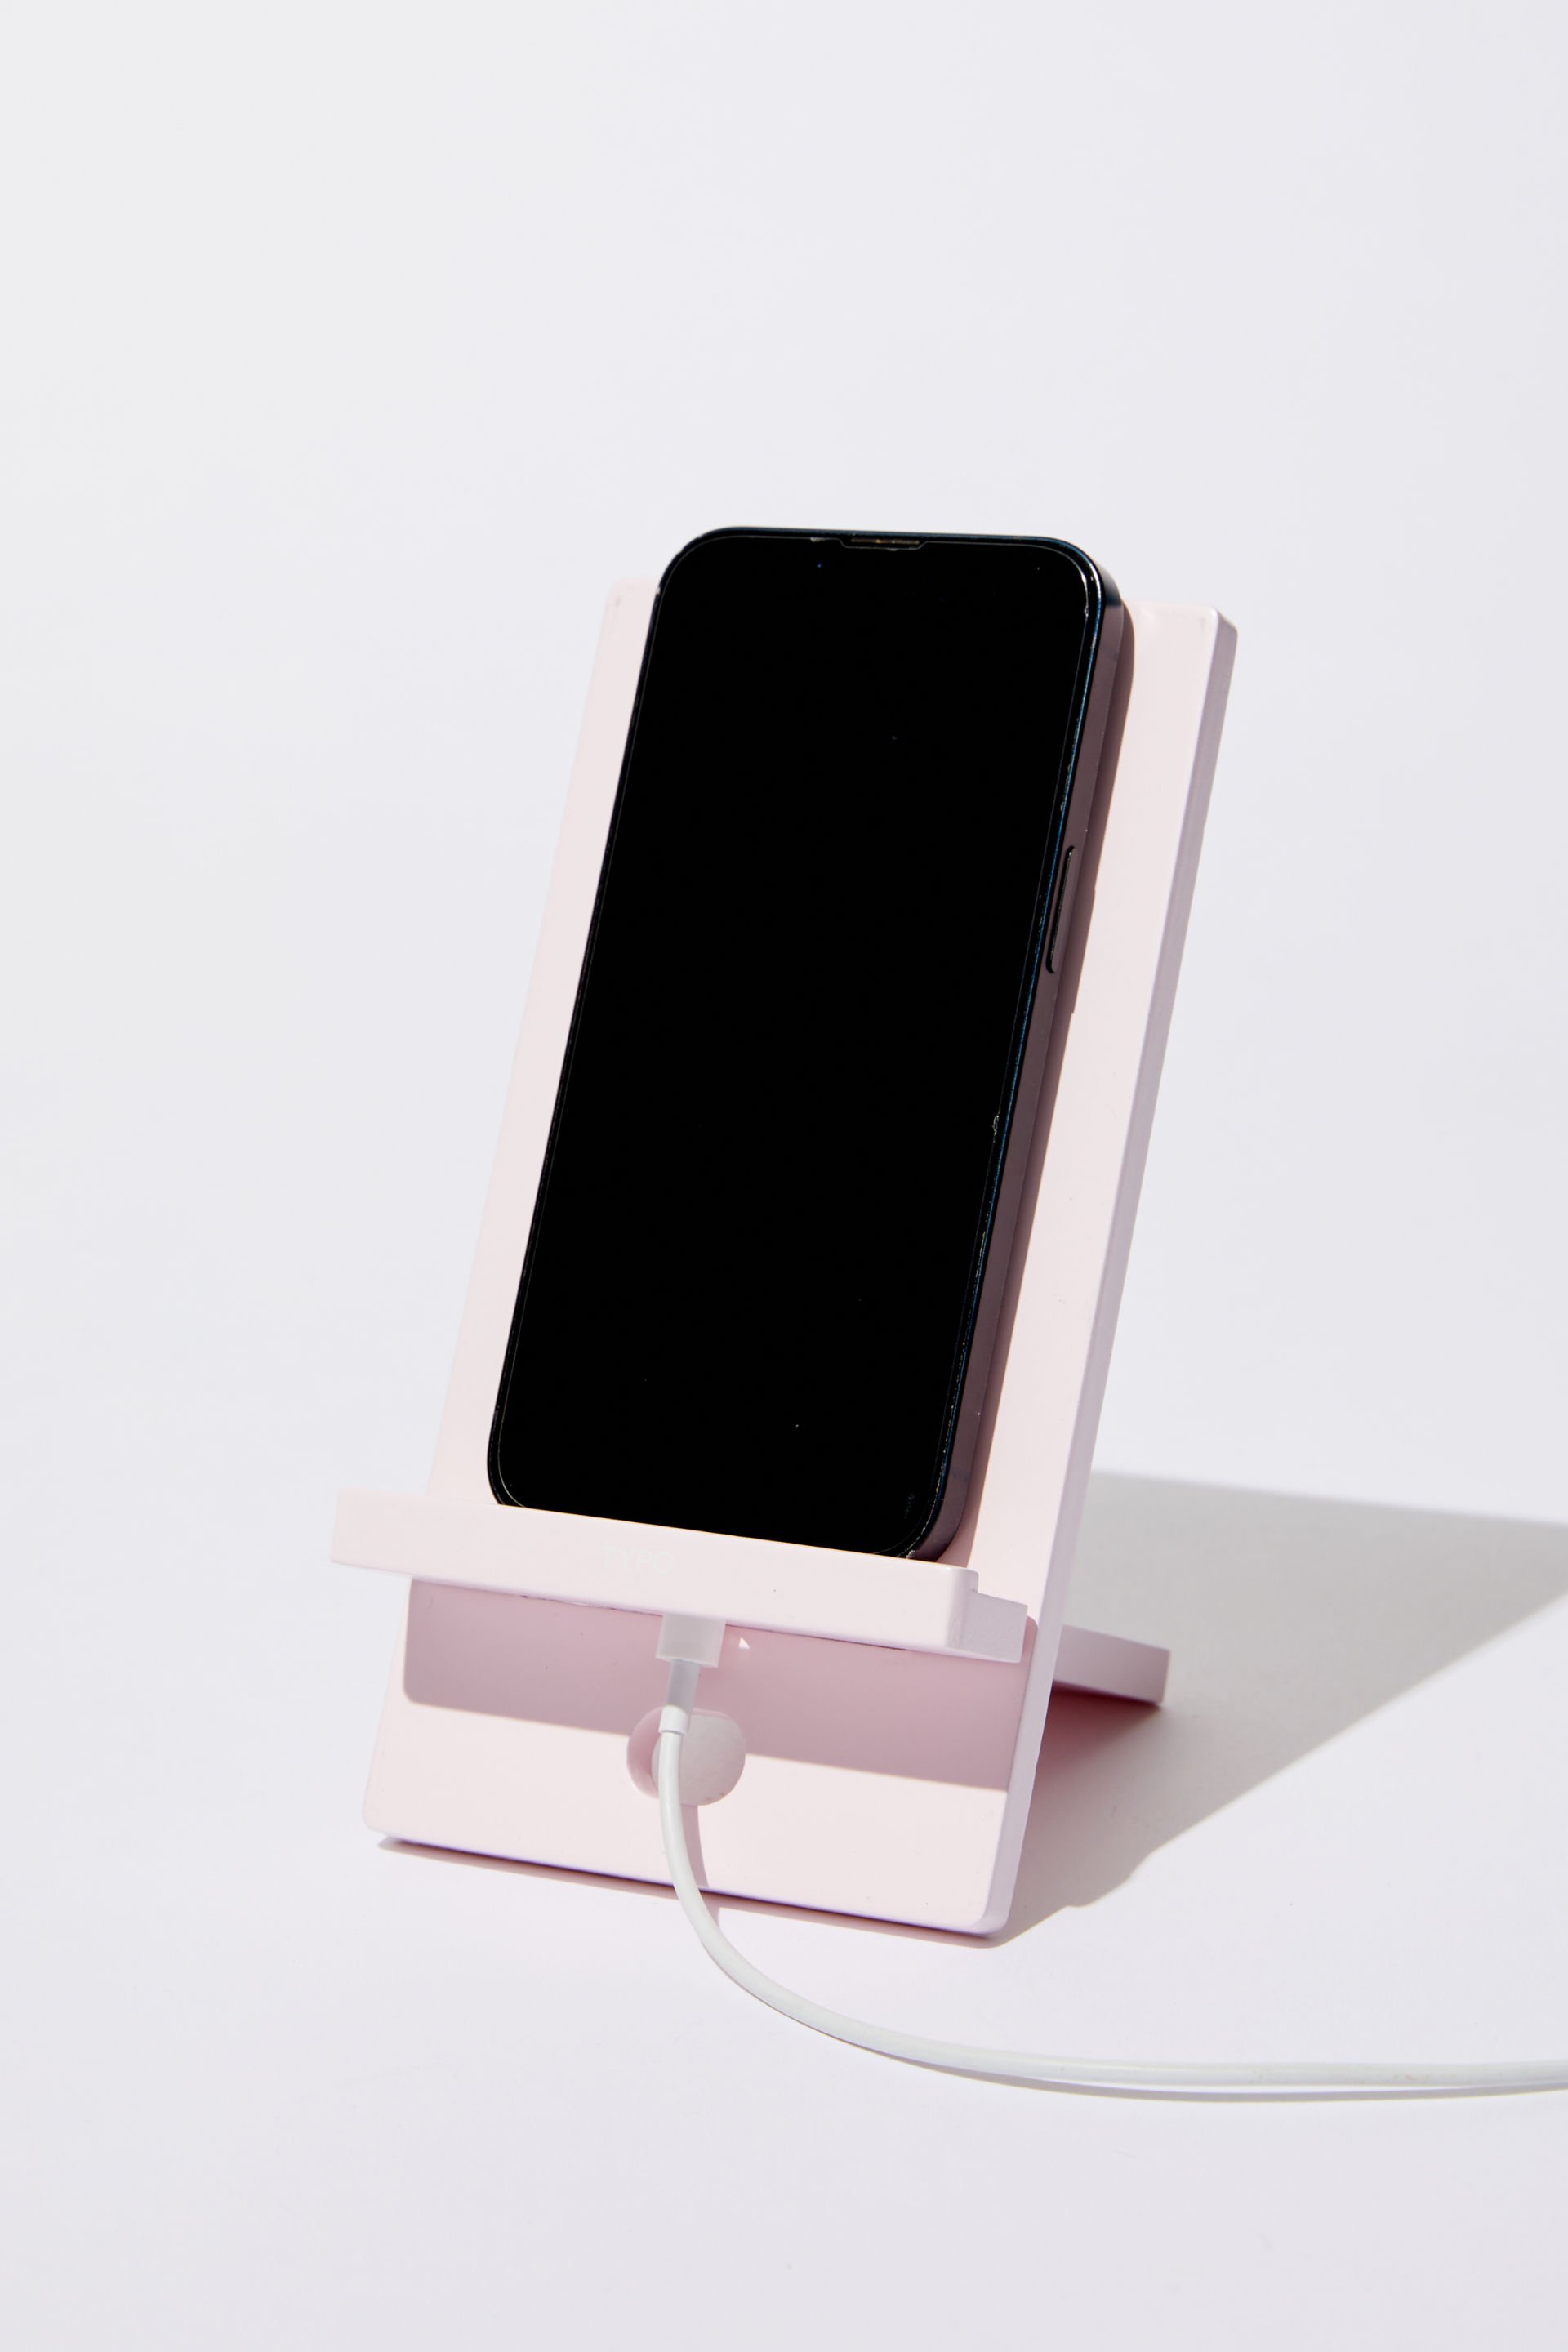 Typo - On Hold Phone Stand - Ballet blush